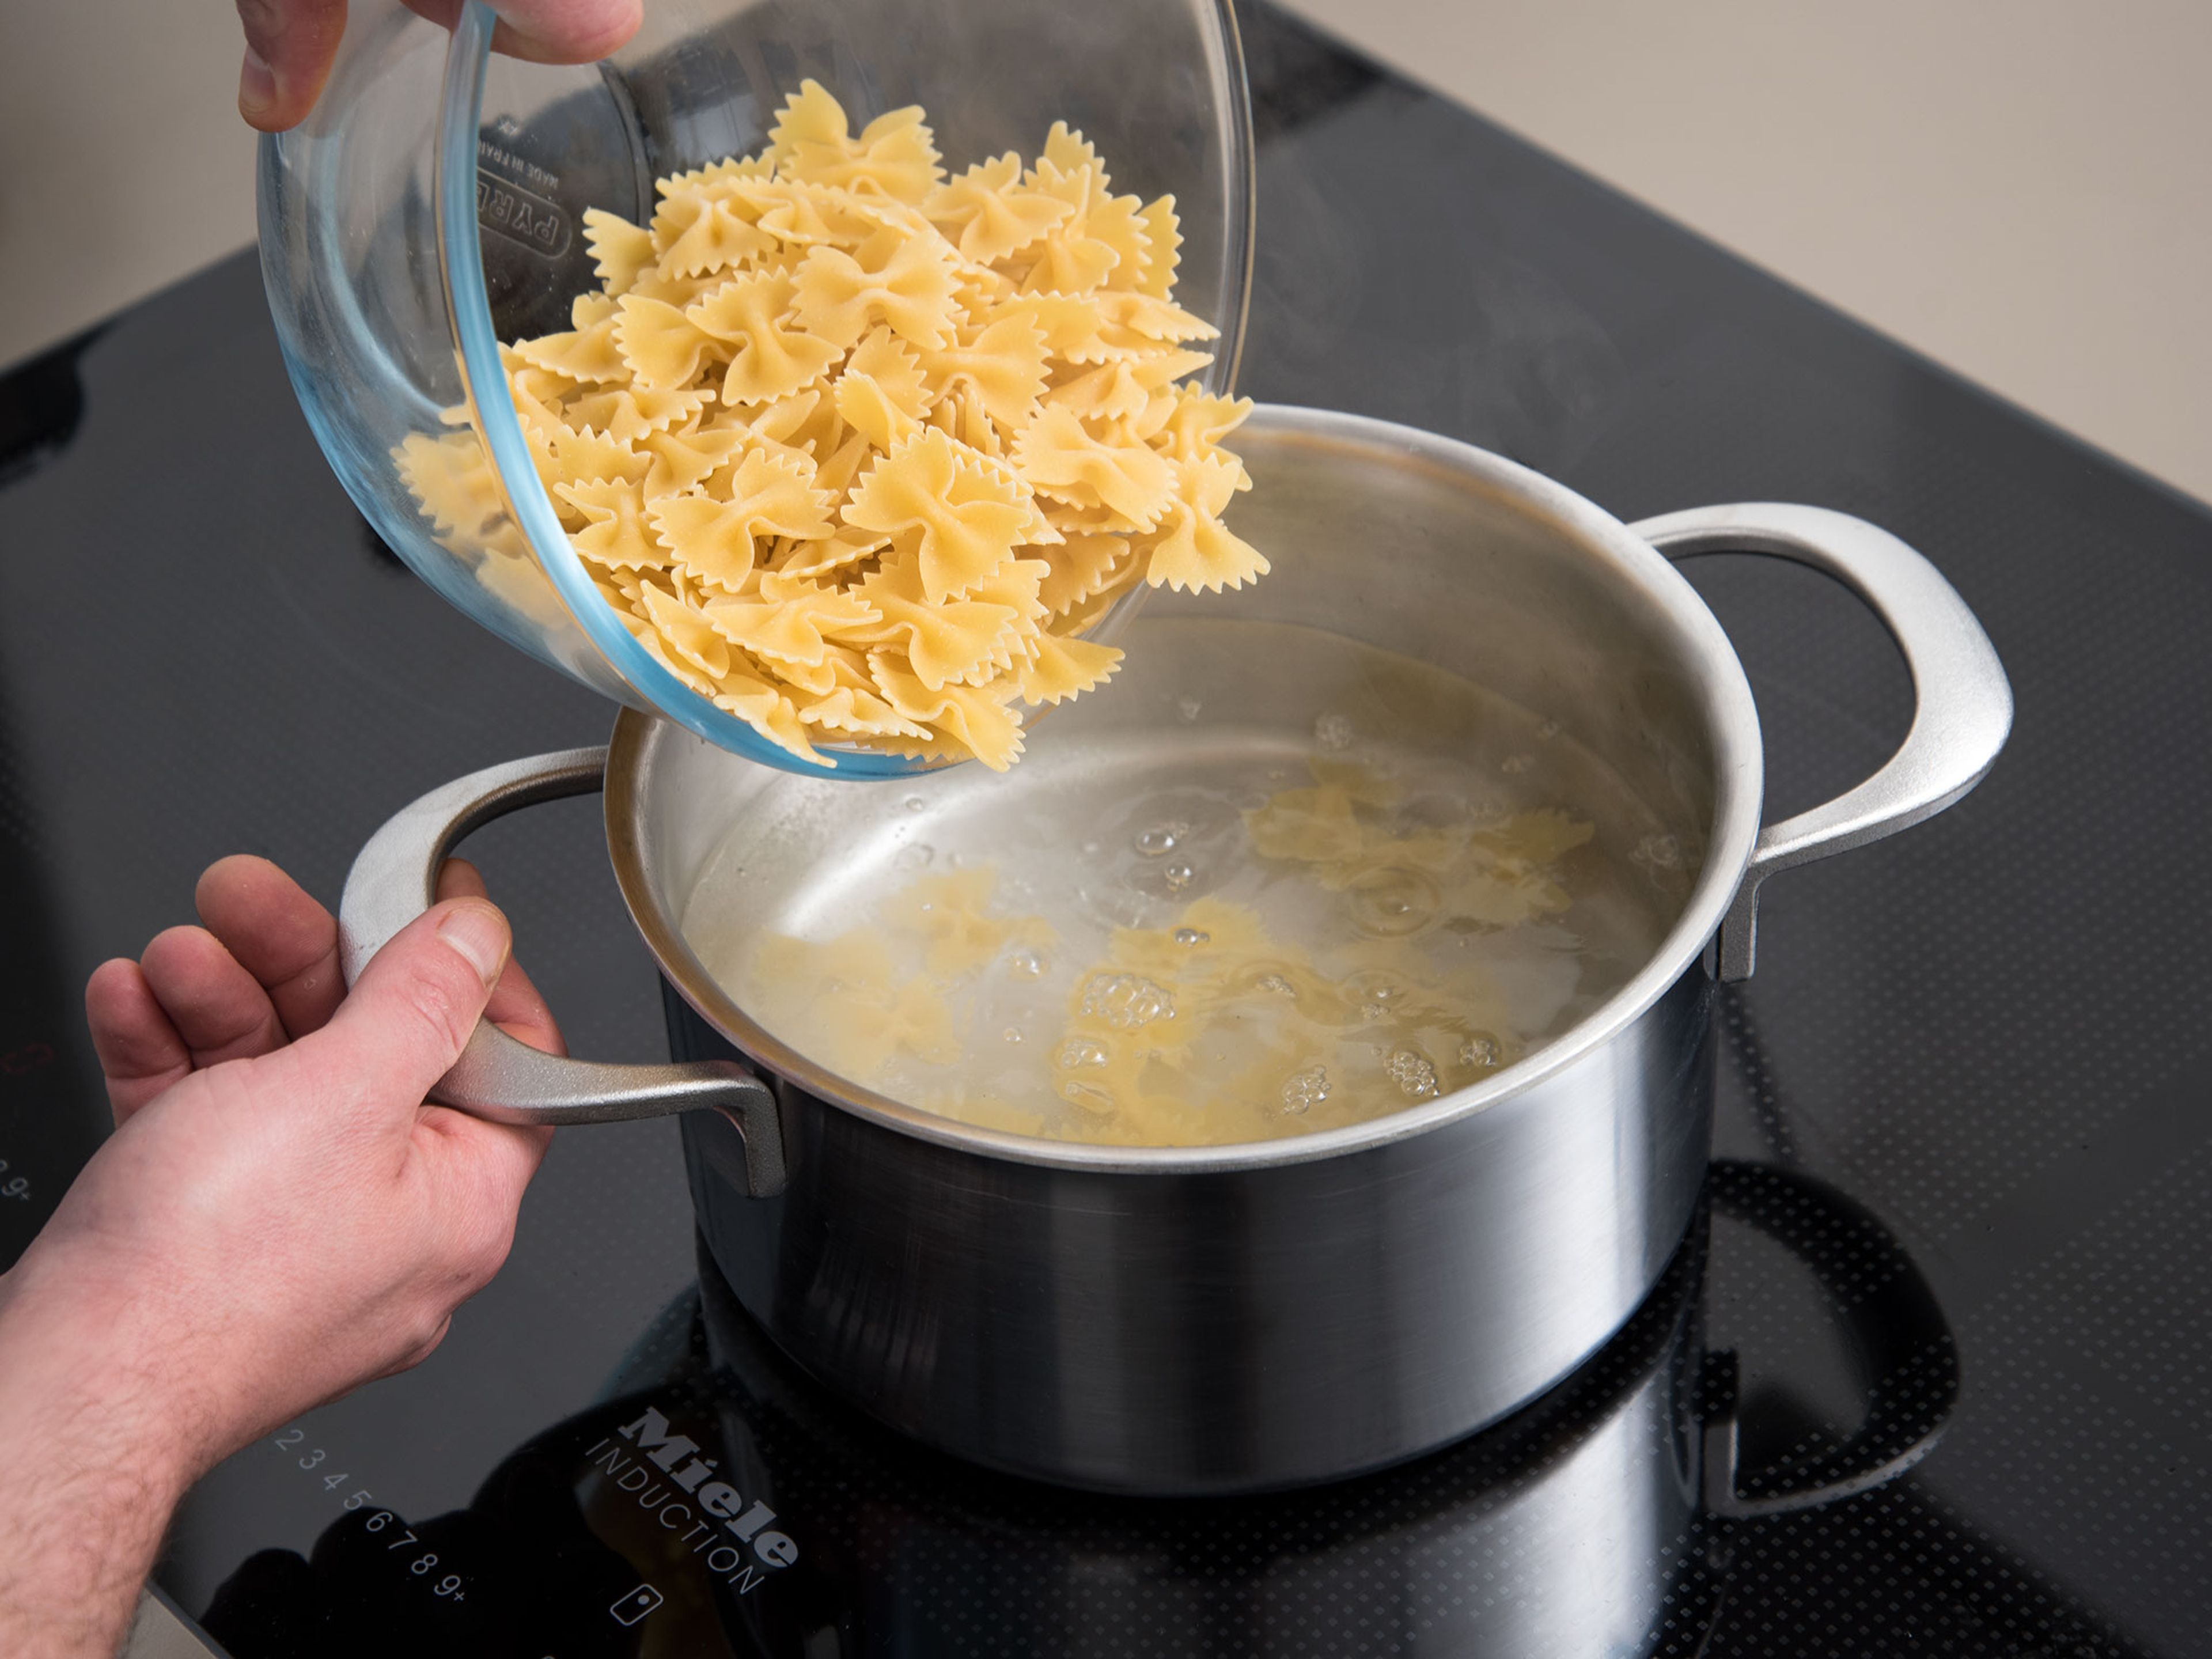 In another pot of boiling, salted water, cook the farfalle until al dente and strain into colander and drain.